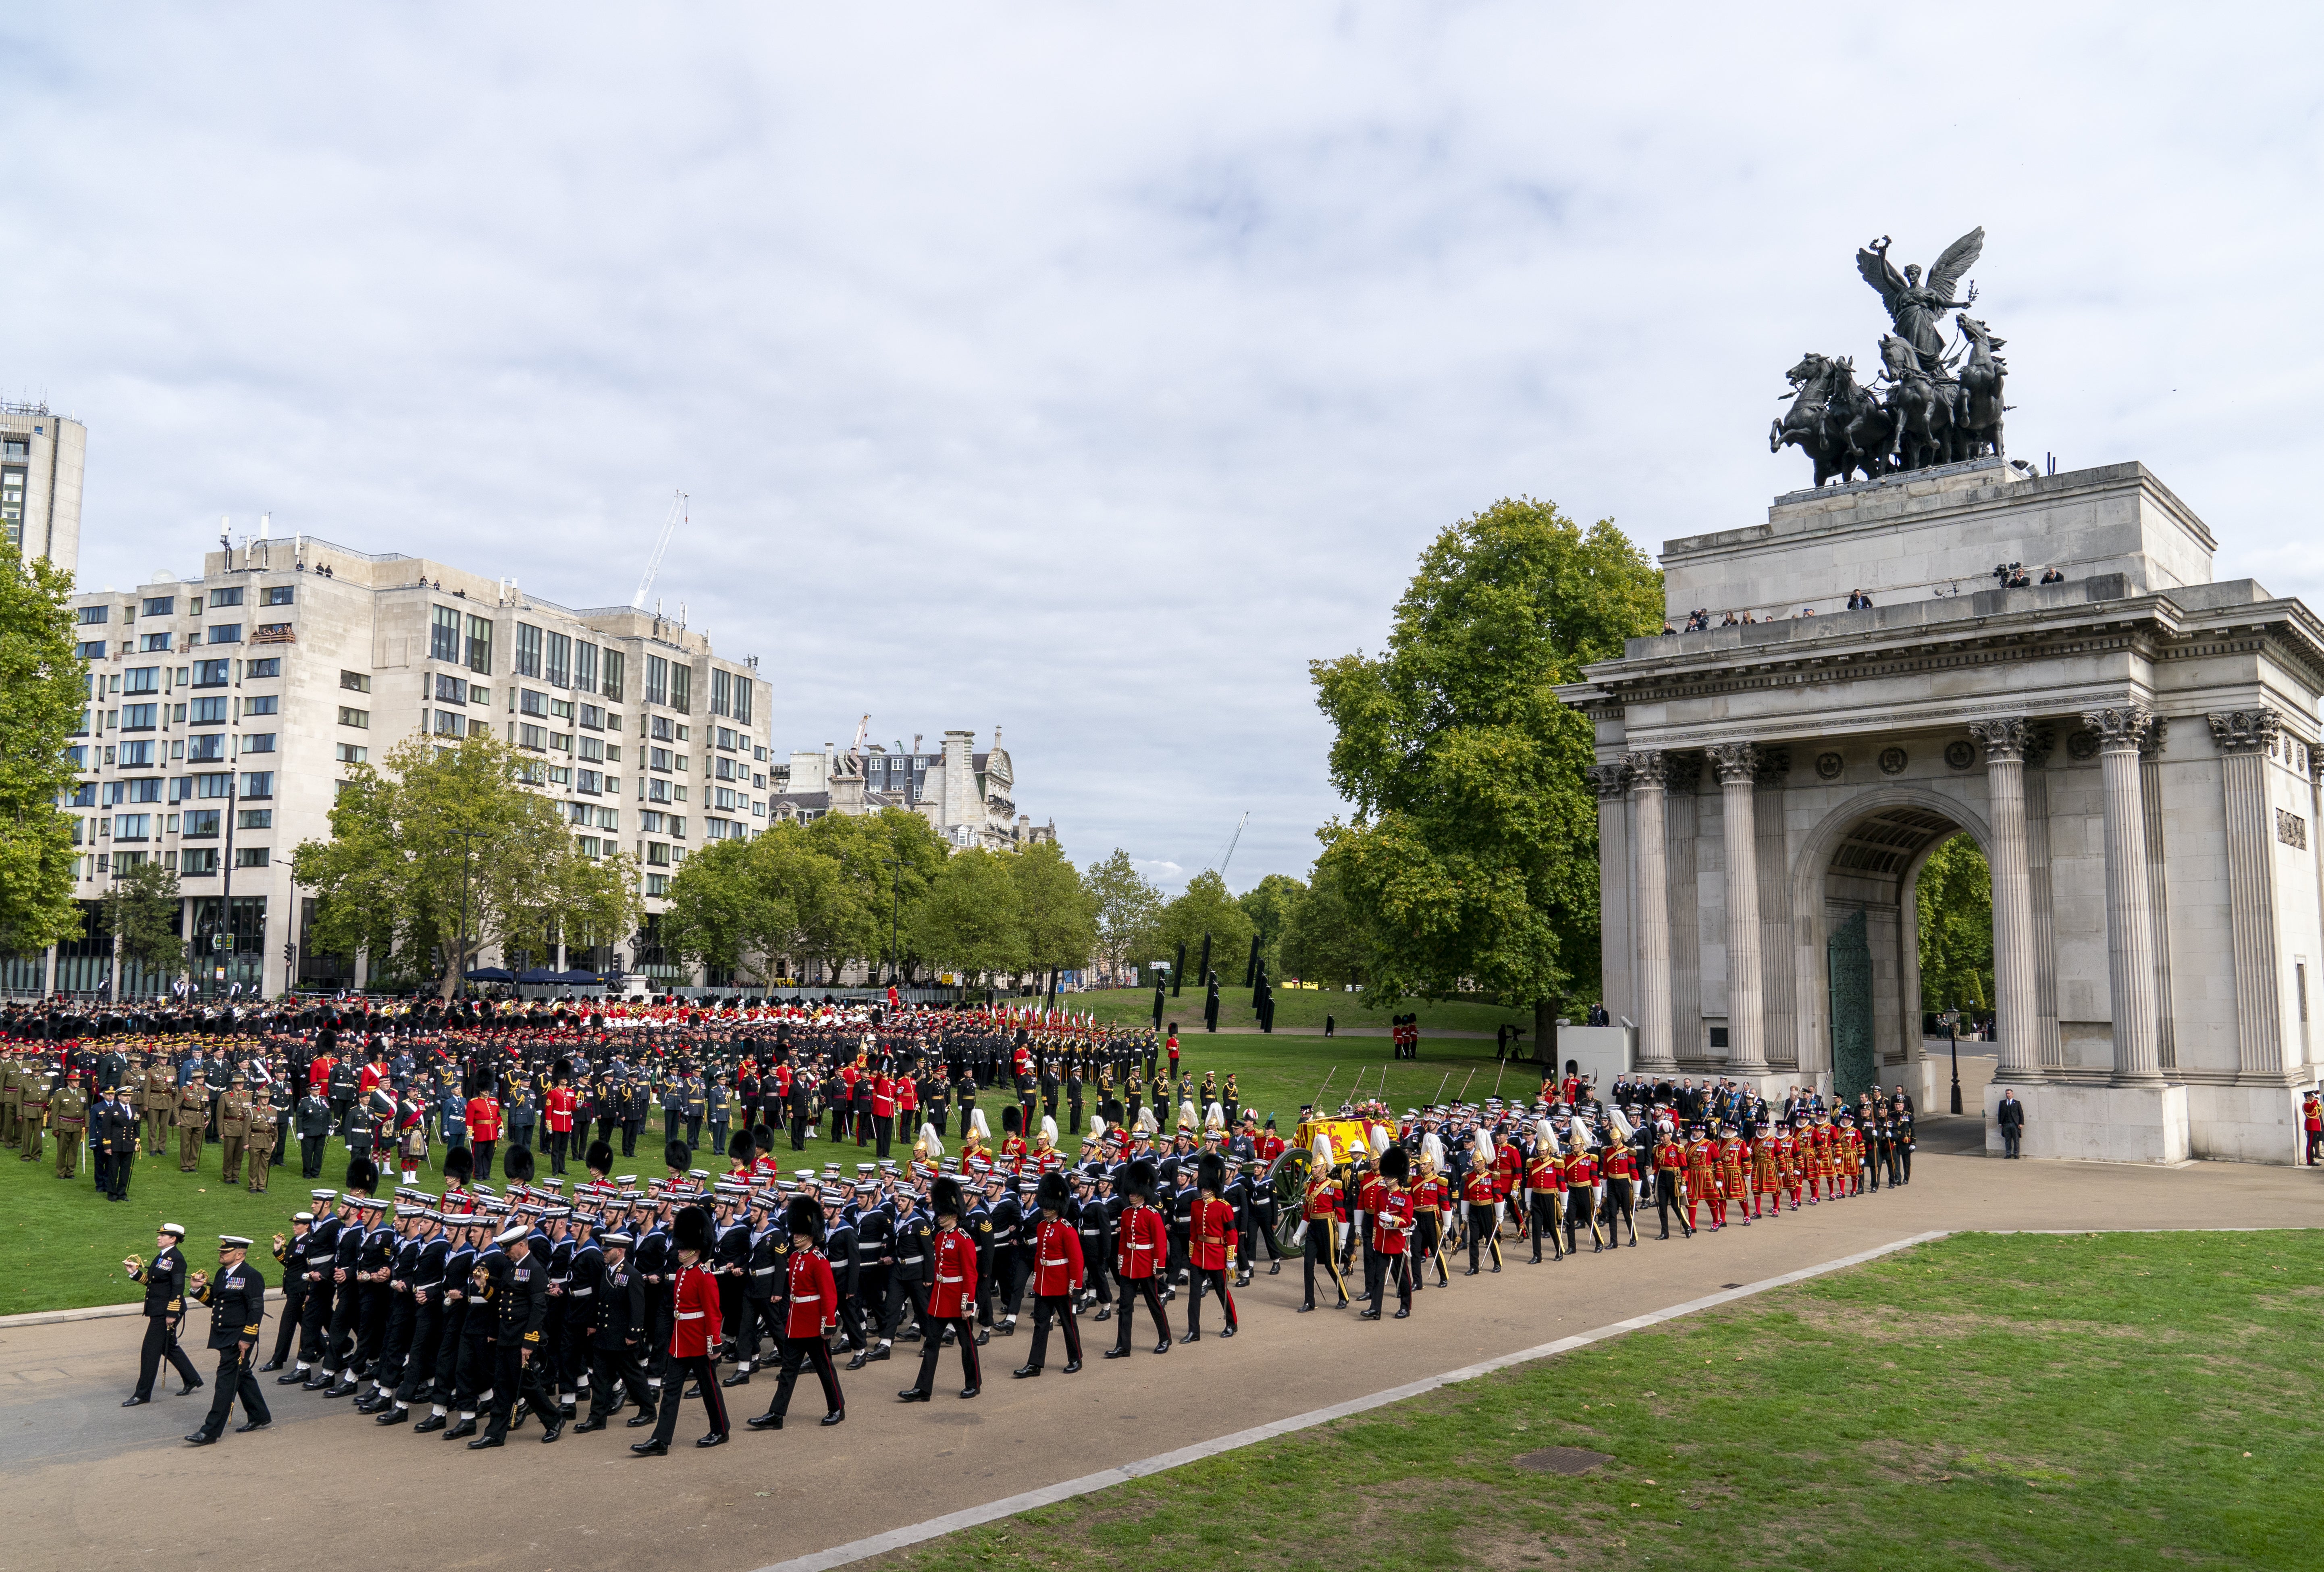 The State Gun Carriage arrives at Wellington Arch (Jane Barlow/PA)